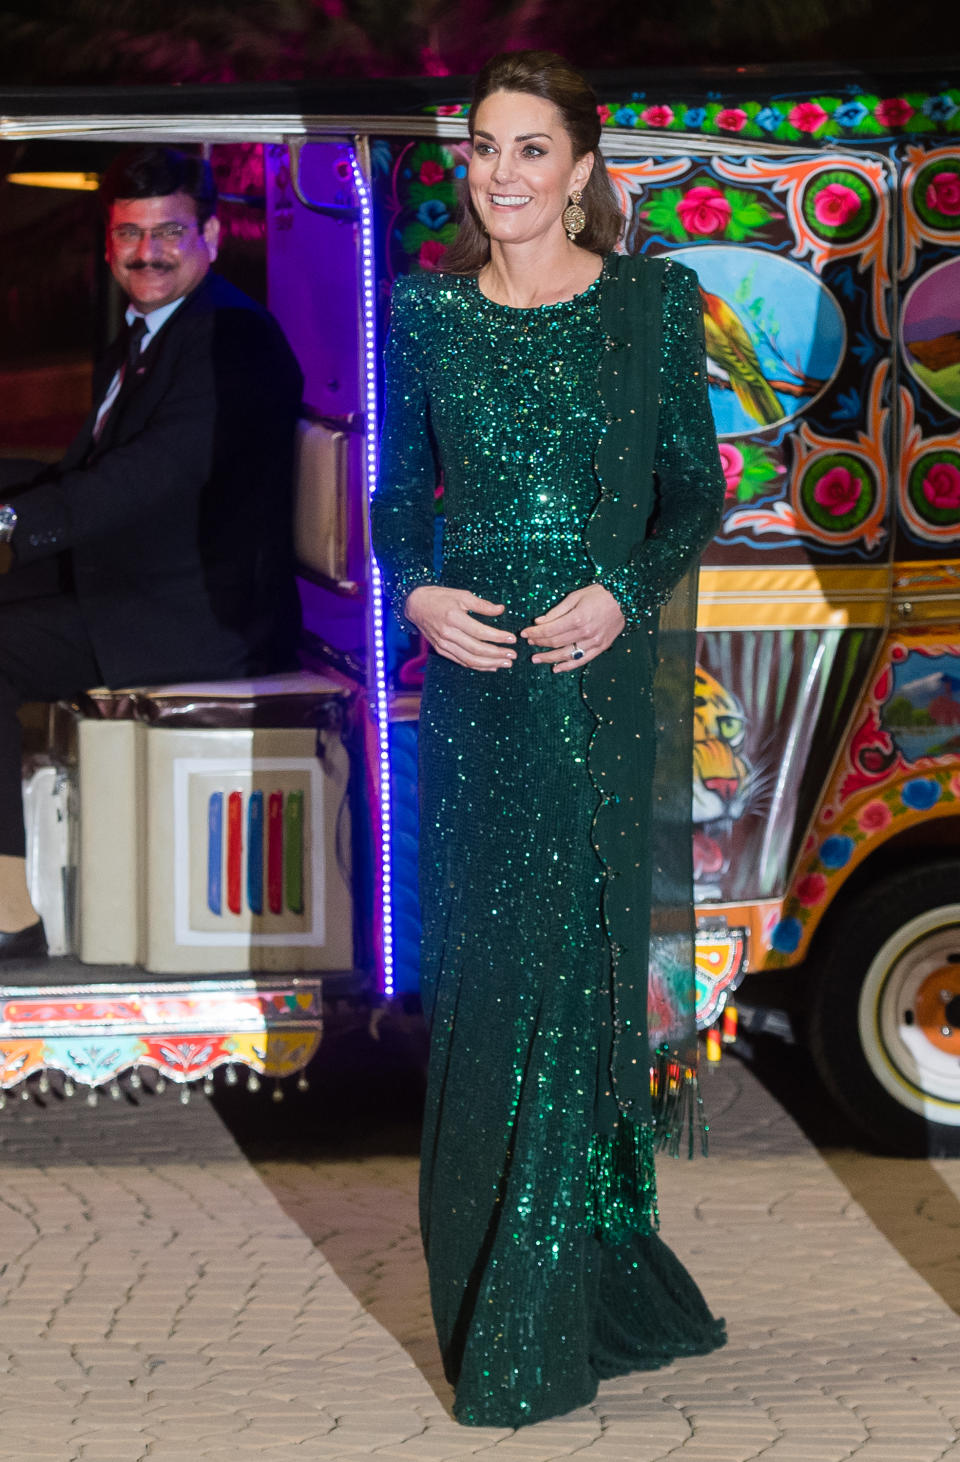 ISLAMABAD, PAKISTAN - OCTOBER 15: Catherine, Duchess of Cambridge and Prince William, Duke of Cambridge arrive by Tuk Tuk as they attend a special reception hosted by the British High Commissioner Thomas Drew, at the Pakistan National Monument, during day two of their royal tour of Pakistan on October 15, 2019 in Islamabad, Pakistan. (Photo by Samir Hussein/WireImage)